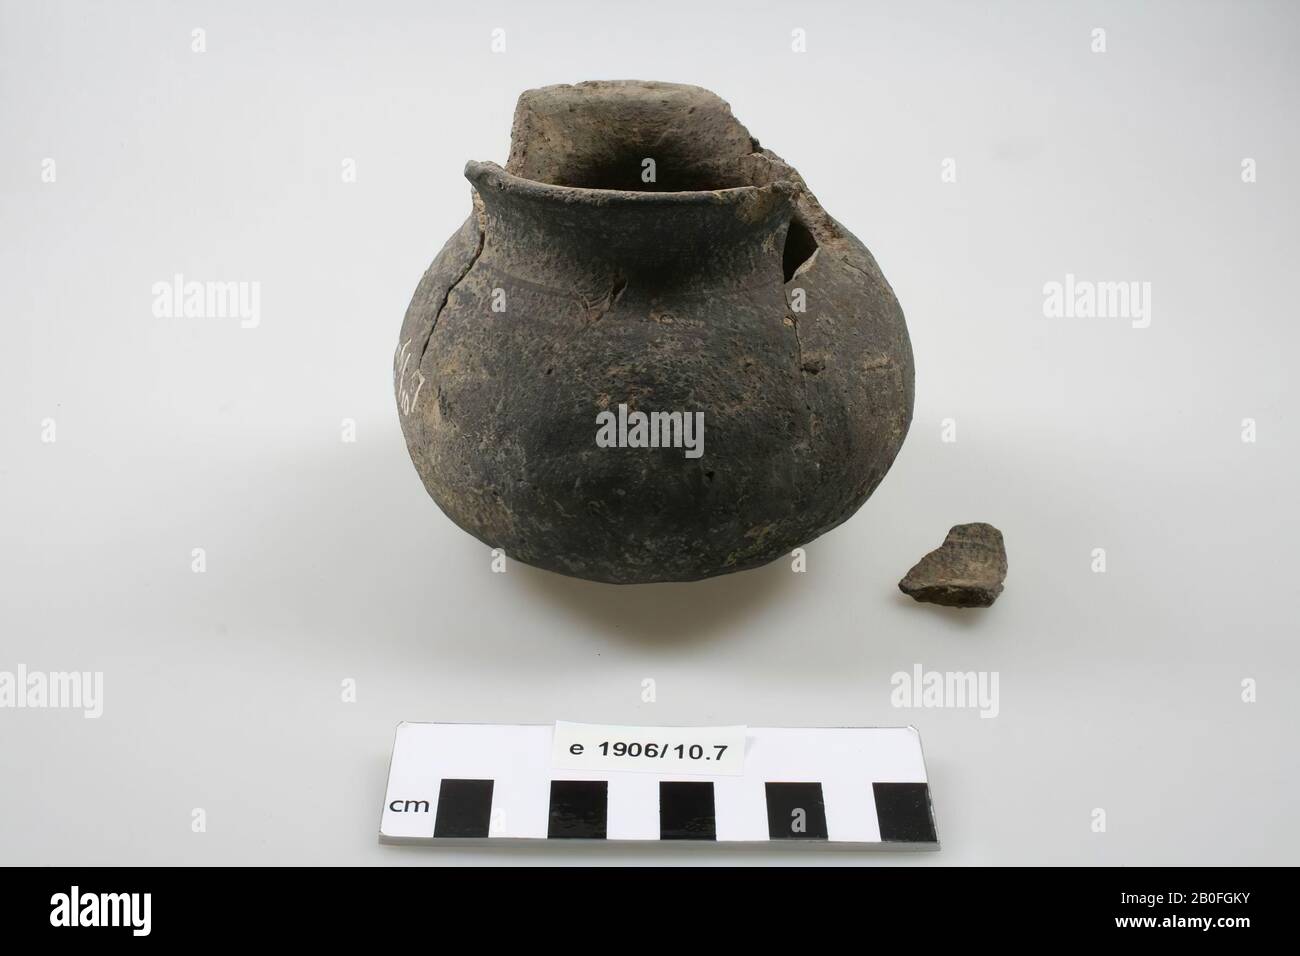 Parts of the edge are missing, vertical cracks, 1 loose shard, bullet-shaped, earthenware (hand-formed), h: 9.9 cm, diam: 11.4 cm, lme, Netherlands, are missing from the missing parts. Gelderland, Renkum, Oosterbeek, Gat van Aa Stock Photo